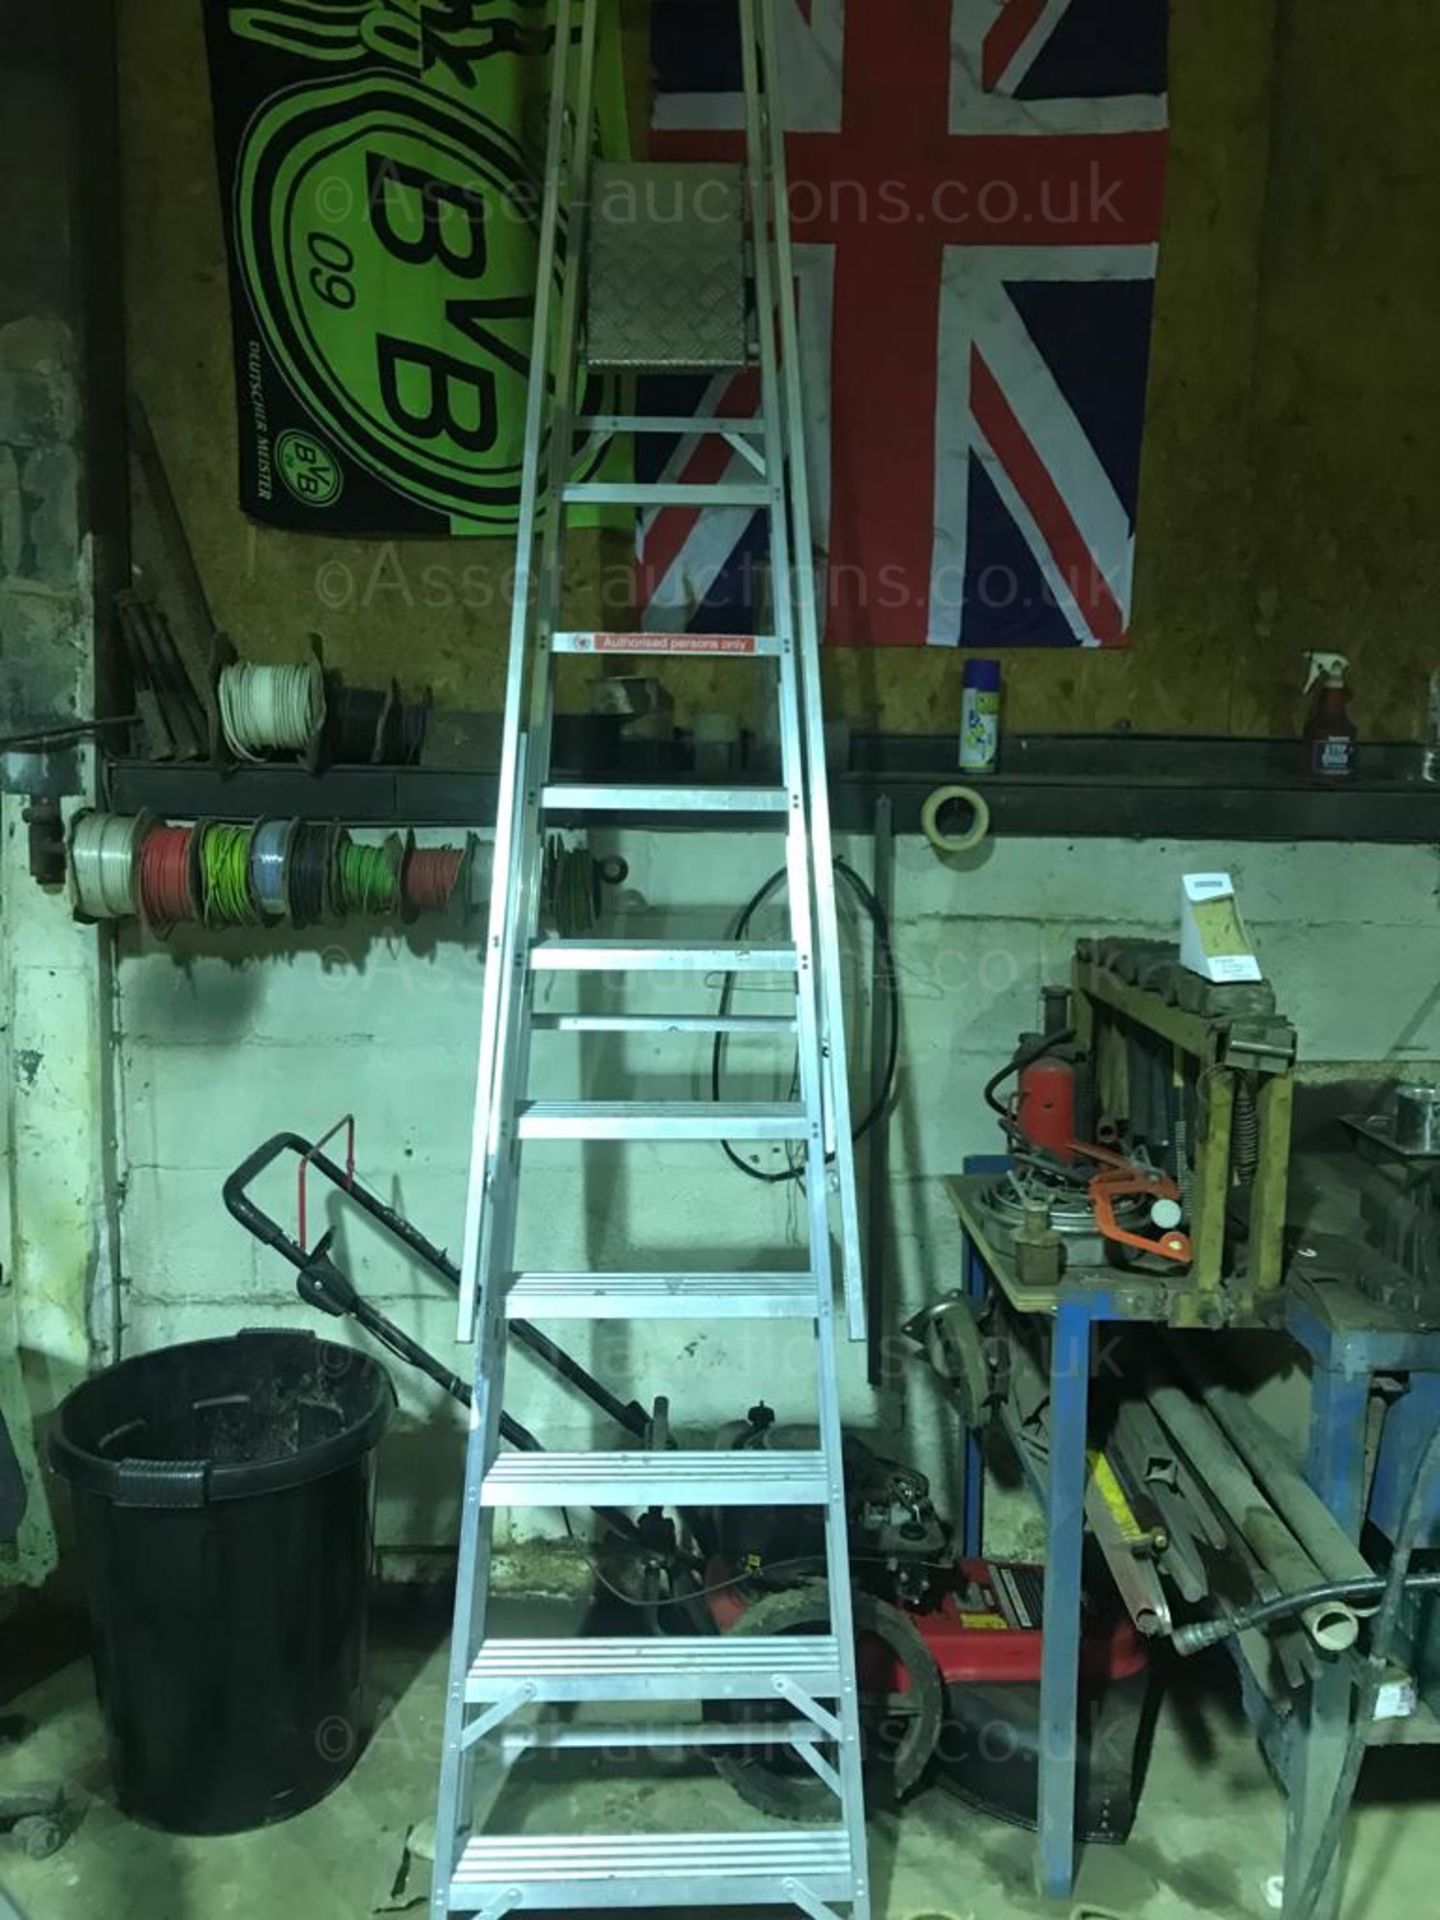 2 SETS OF INDUSTRIAL LADDERS, IN NEW CONDITION, FROM B&Q DEPOT *NO VAT* - Image 3 of 6